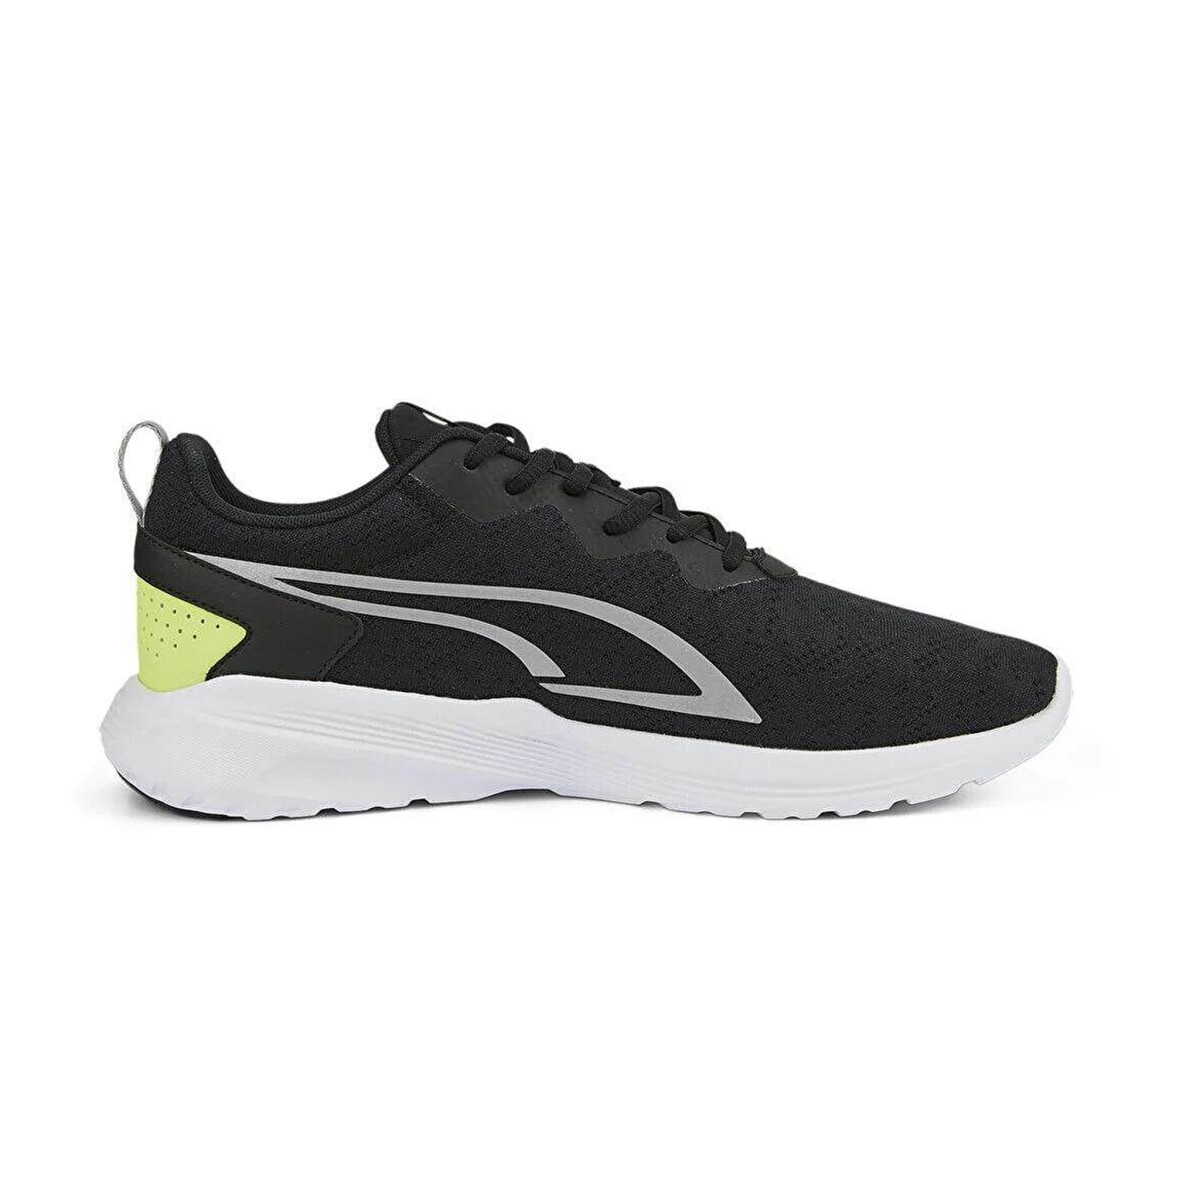 PUMA ALL DAY ACTIVE IN MOTION - Black 